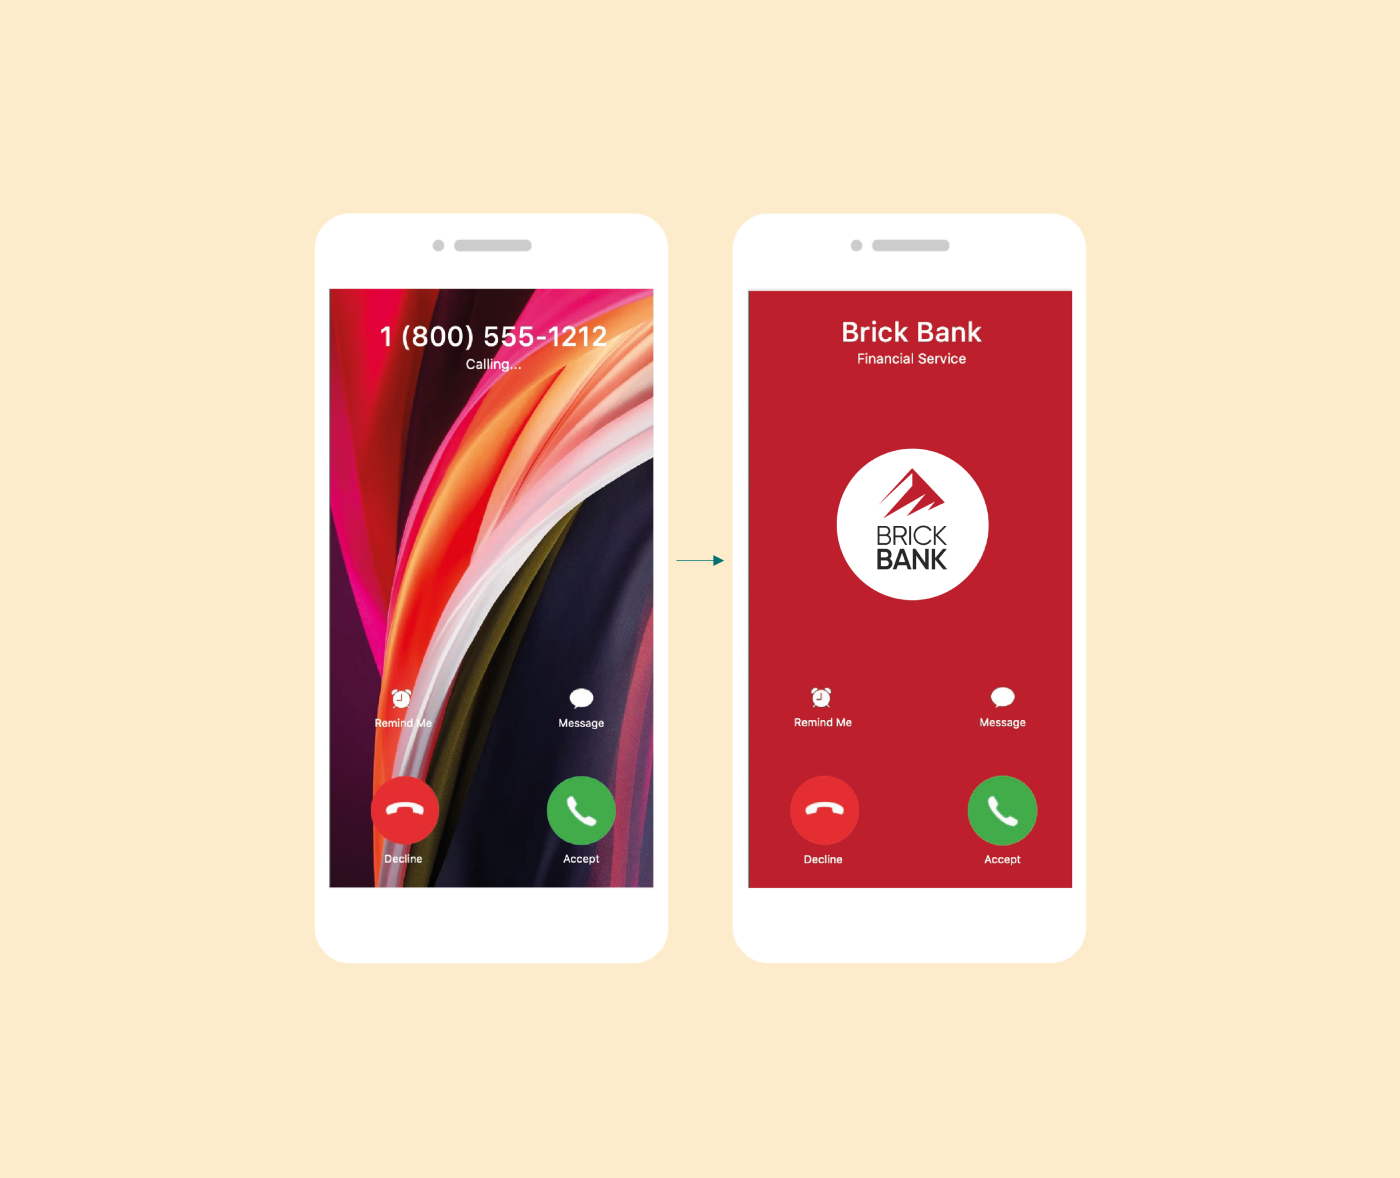 A comparison between a call with a vCard versus a call without a vCard